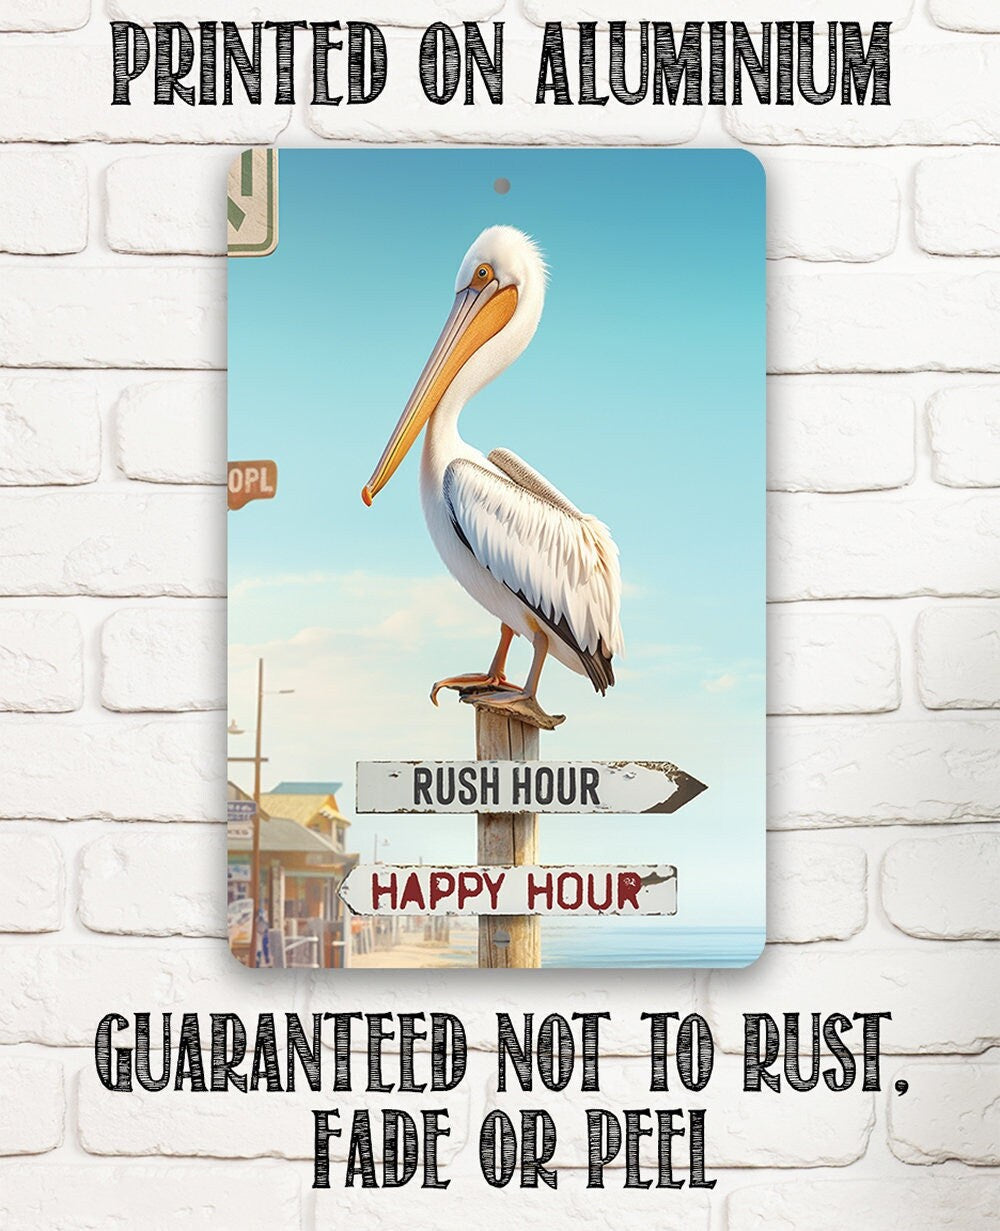 Tin - Rush Hour Happy Hour - Beach House and Summer Decor - Durable Metal Sign - 8" x 12" or 12" x 18" Use Indoor/Outdoor -Housewarming Gift